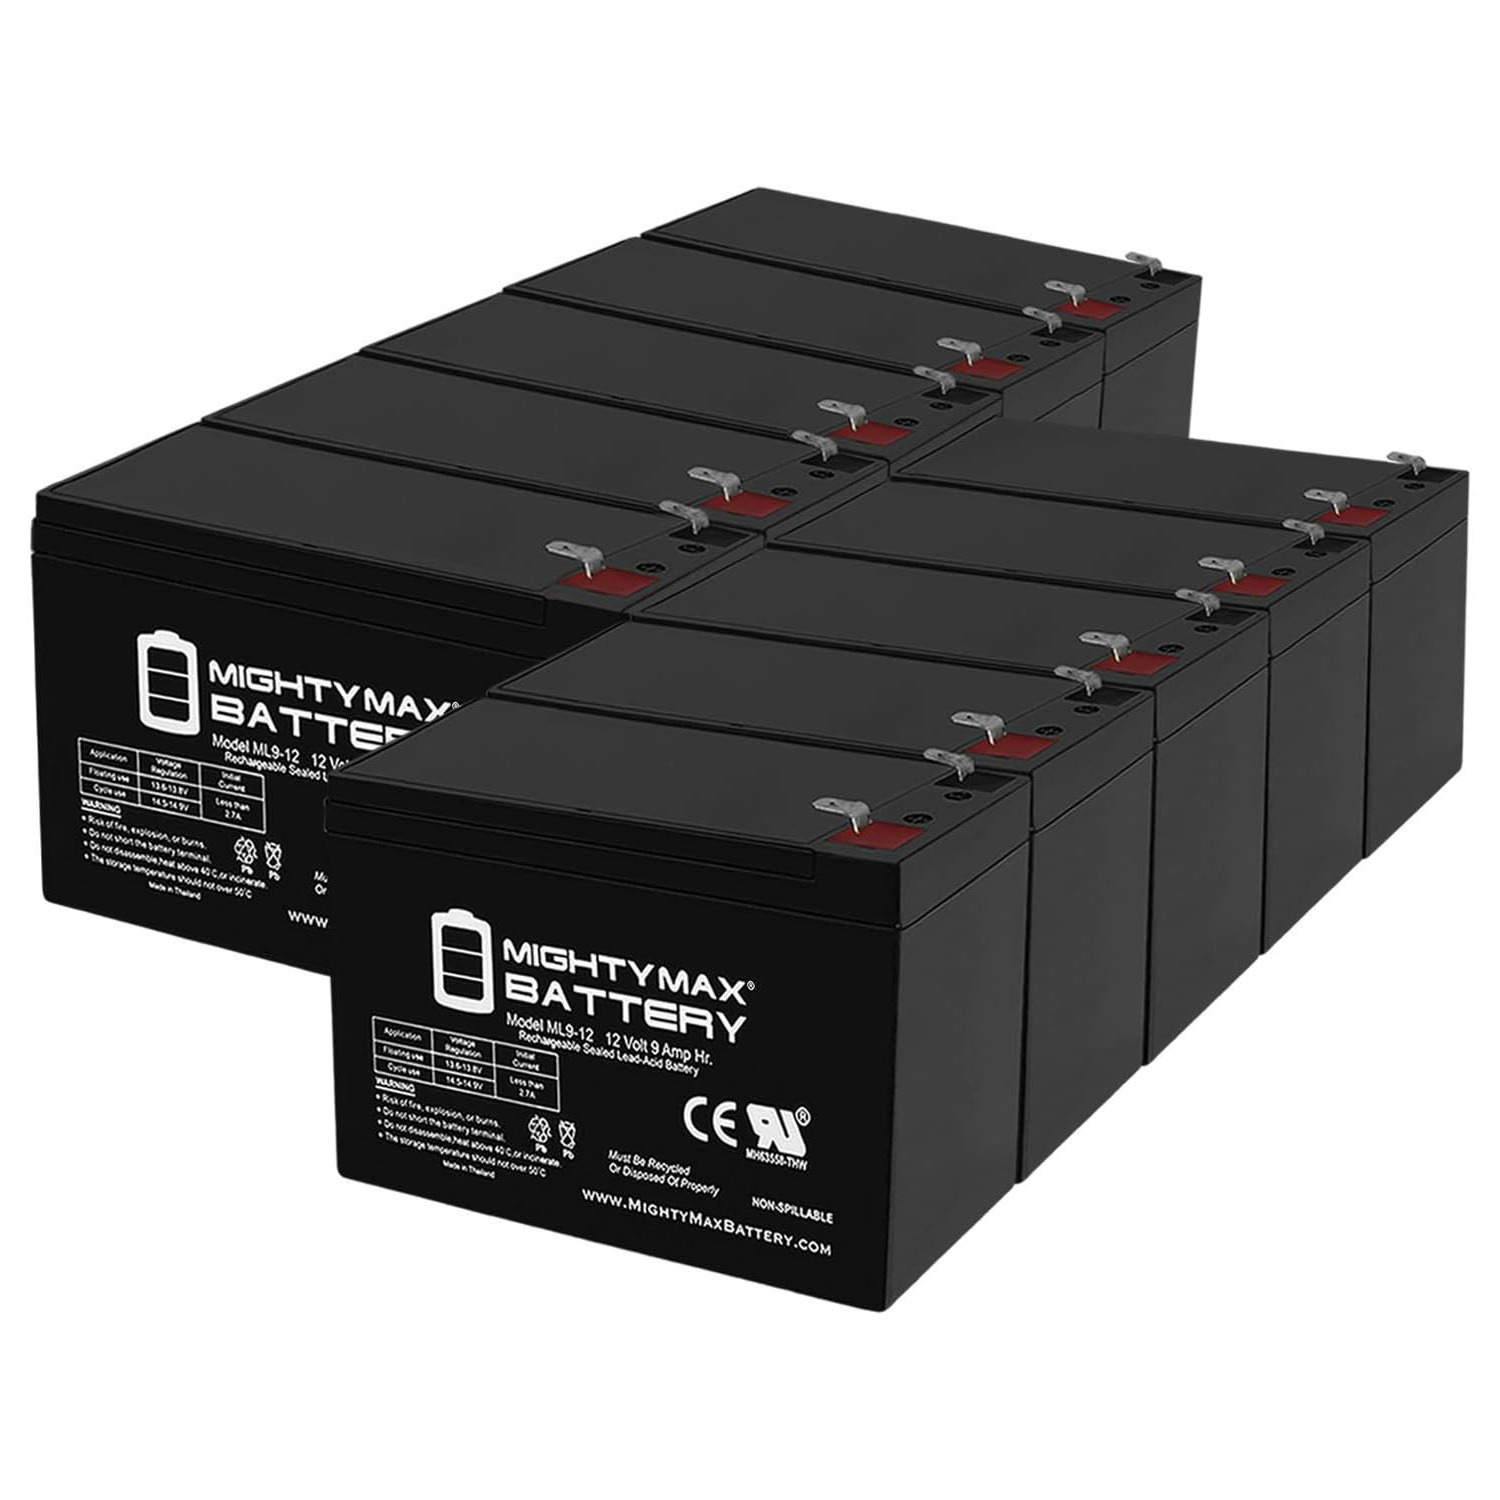 Altronix SMP3PMCTX 12V, 9Ah Lead Acid Battery - 10 Pack